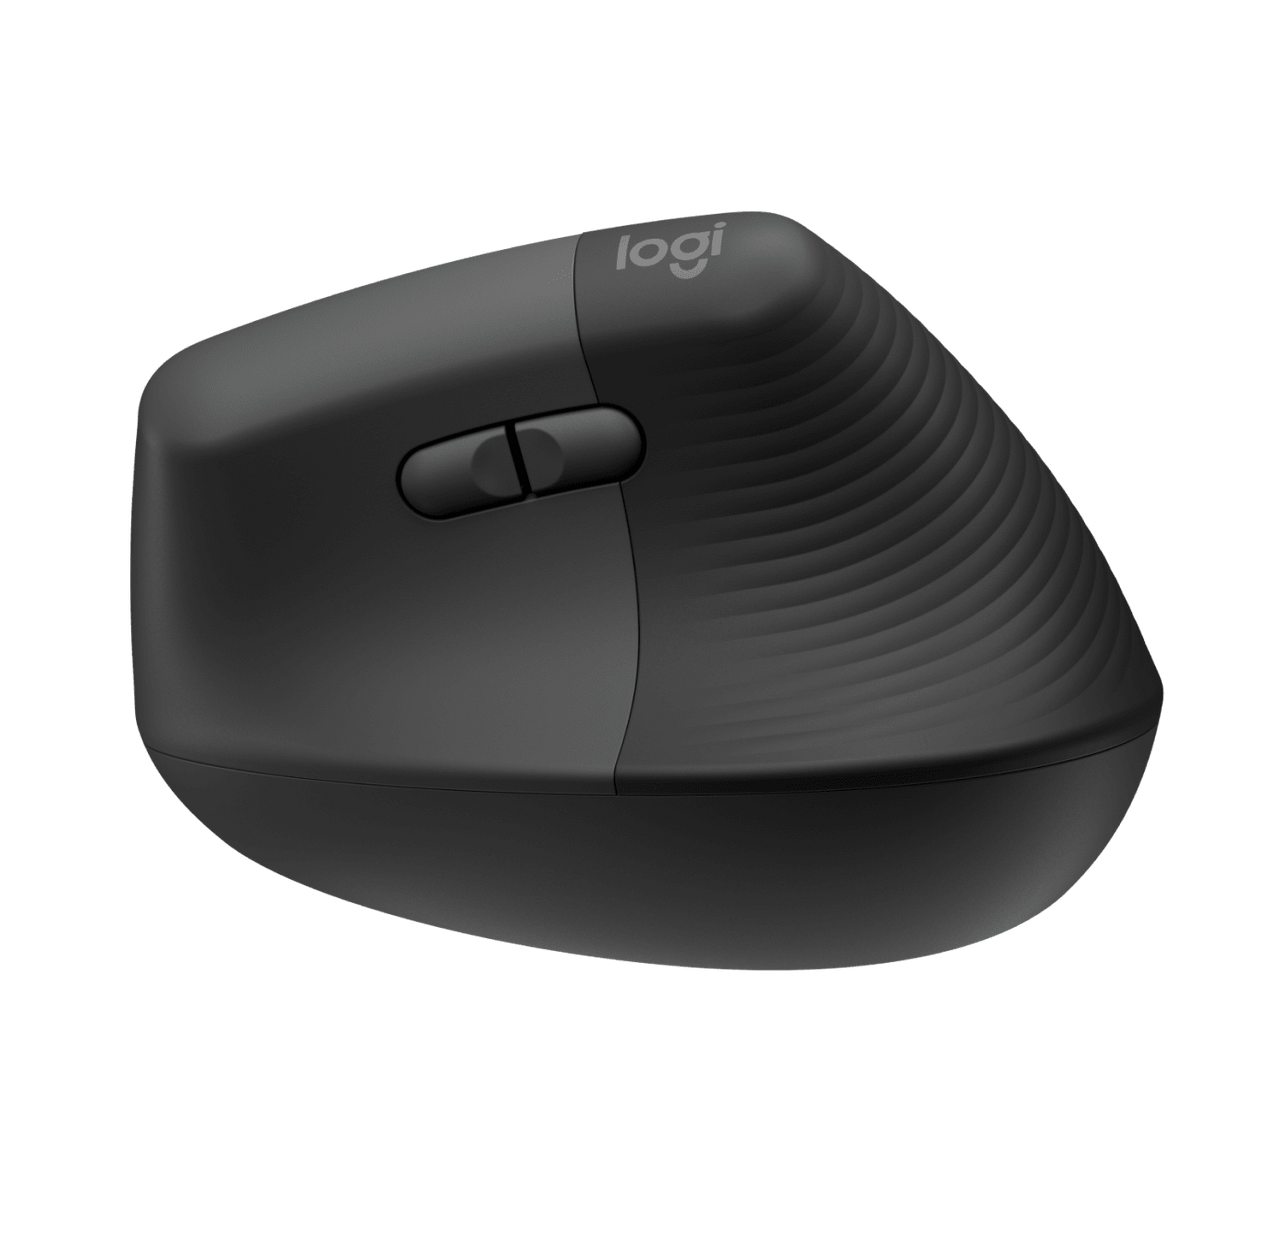 Logitech M190 Full-size Wireless Mouse Bluetooth Smooth Optical Tracking  USB Receiver Fast Tracking Computer Laptop Tablet